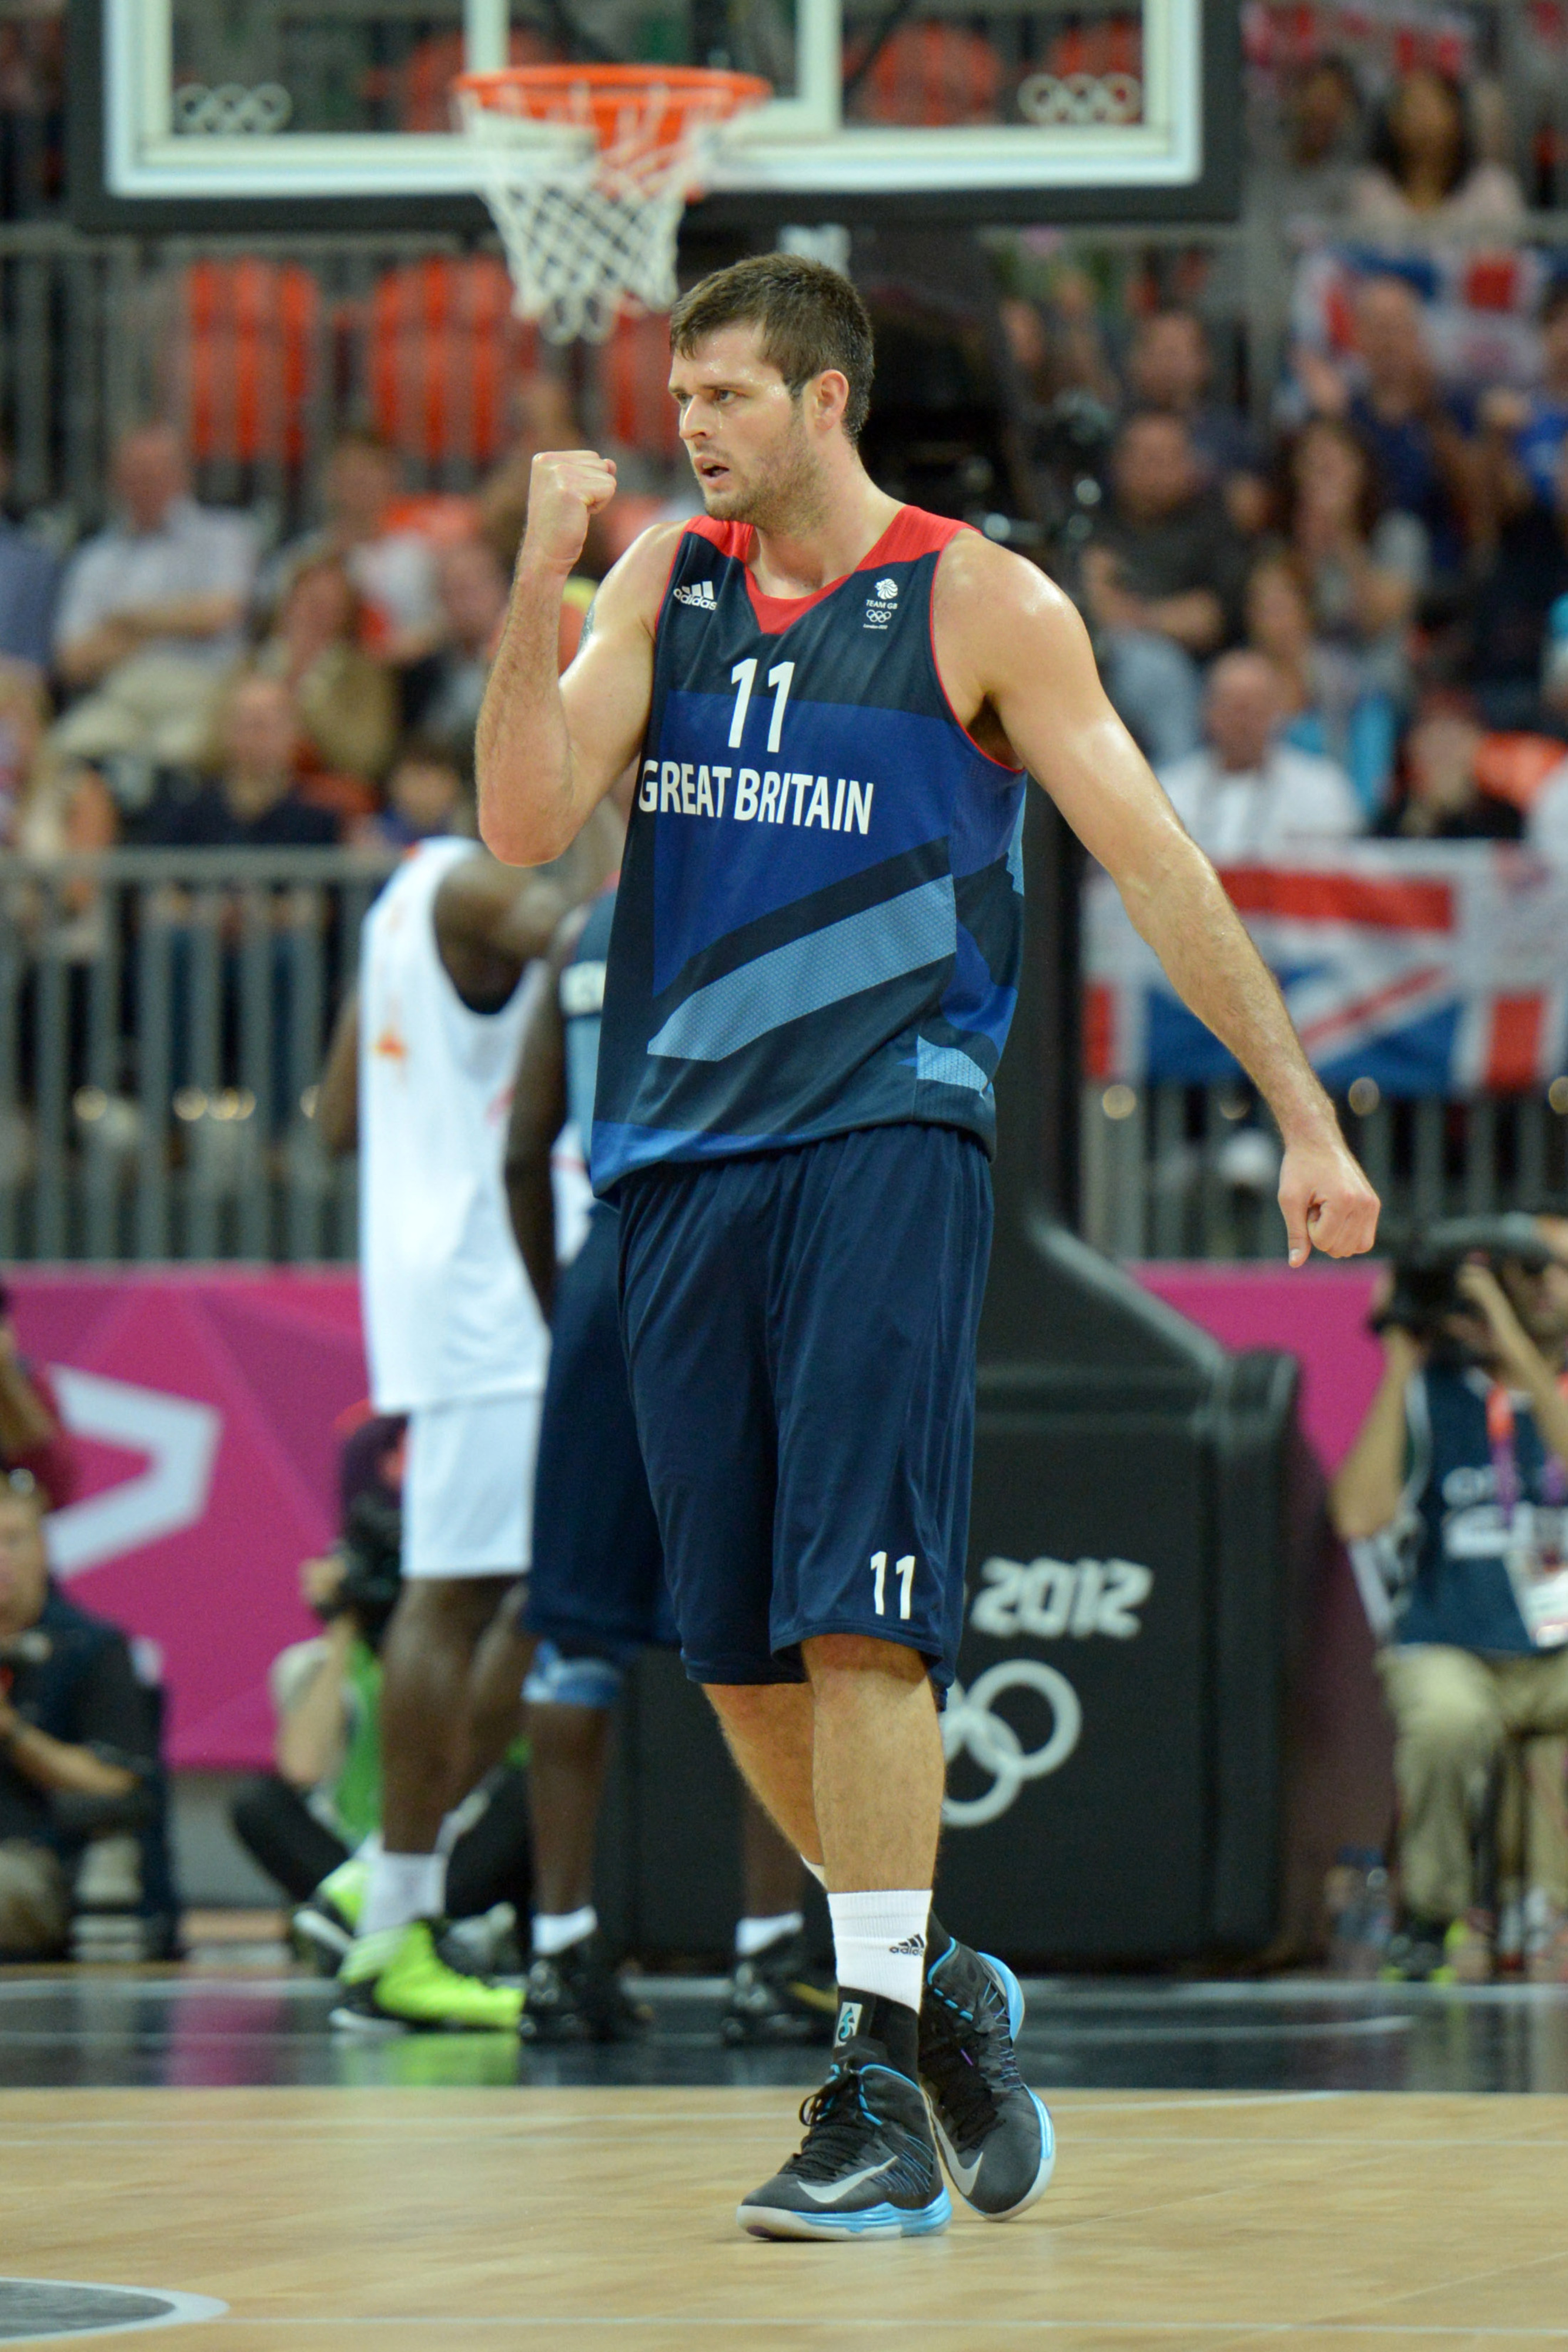 Aug 2, 2012; London, United Kingdom; Great Britain forward Joel Freeland (11) reacts during the preliminary game against Spain in the London 2012 Olympic Games at Basketball Arena. Mandatory Credit: Kirby Lee-USA TODAY Sports